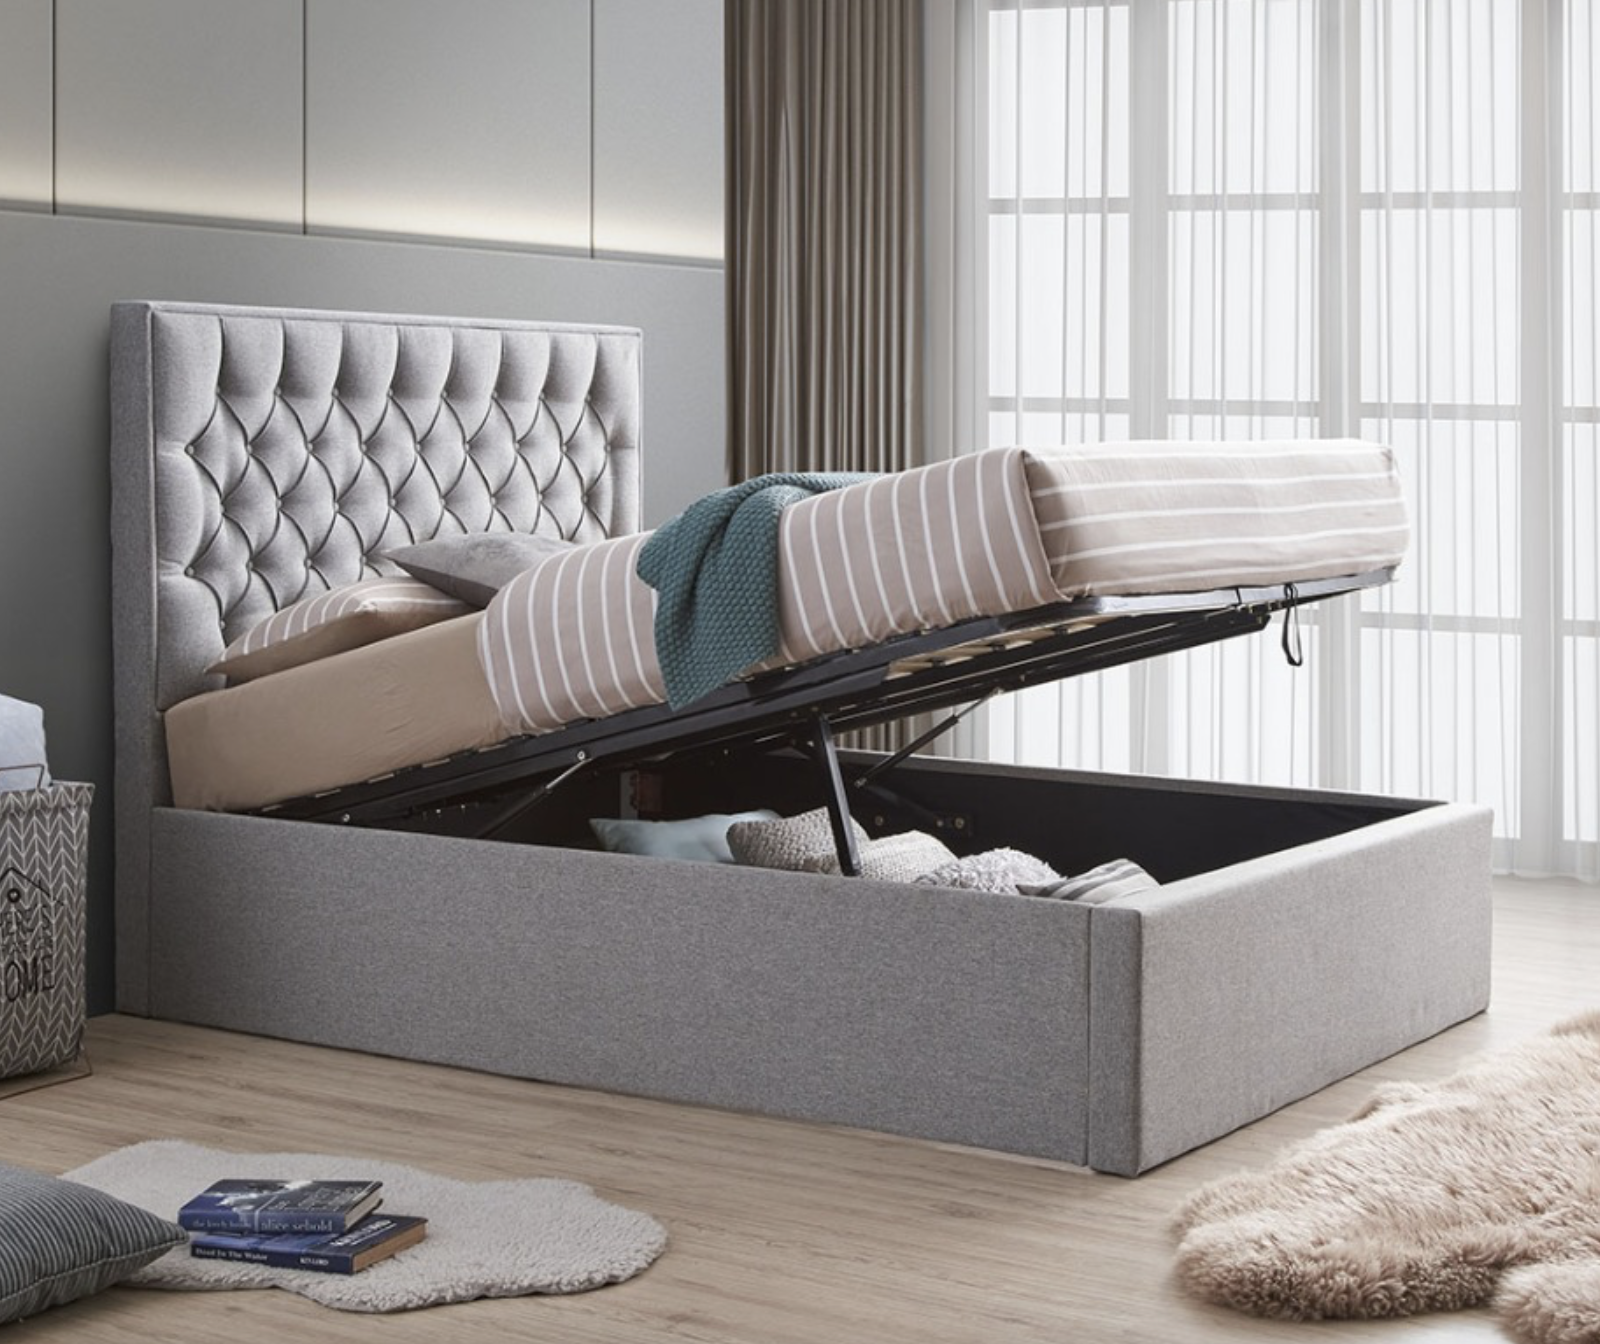 Bedroom furniture with storage Perth